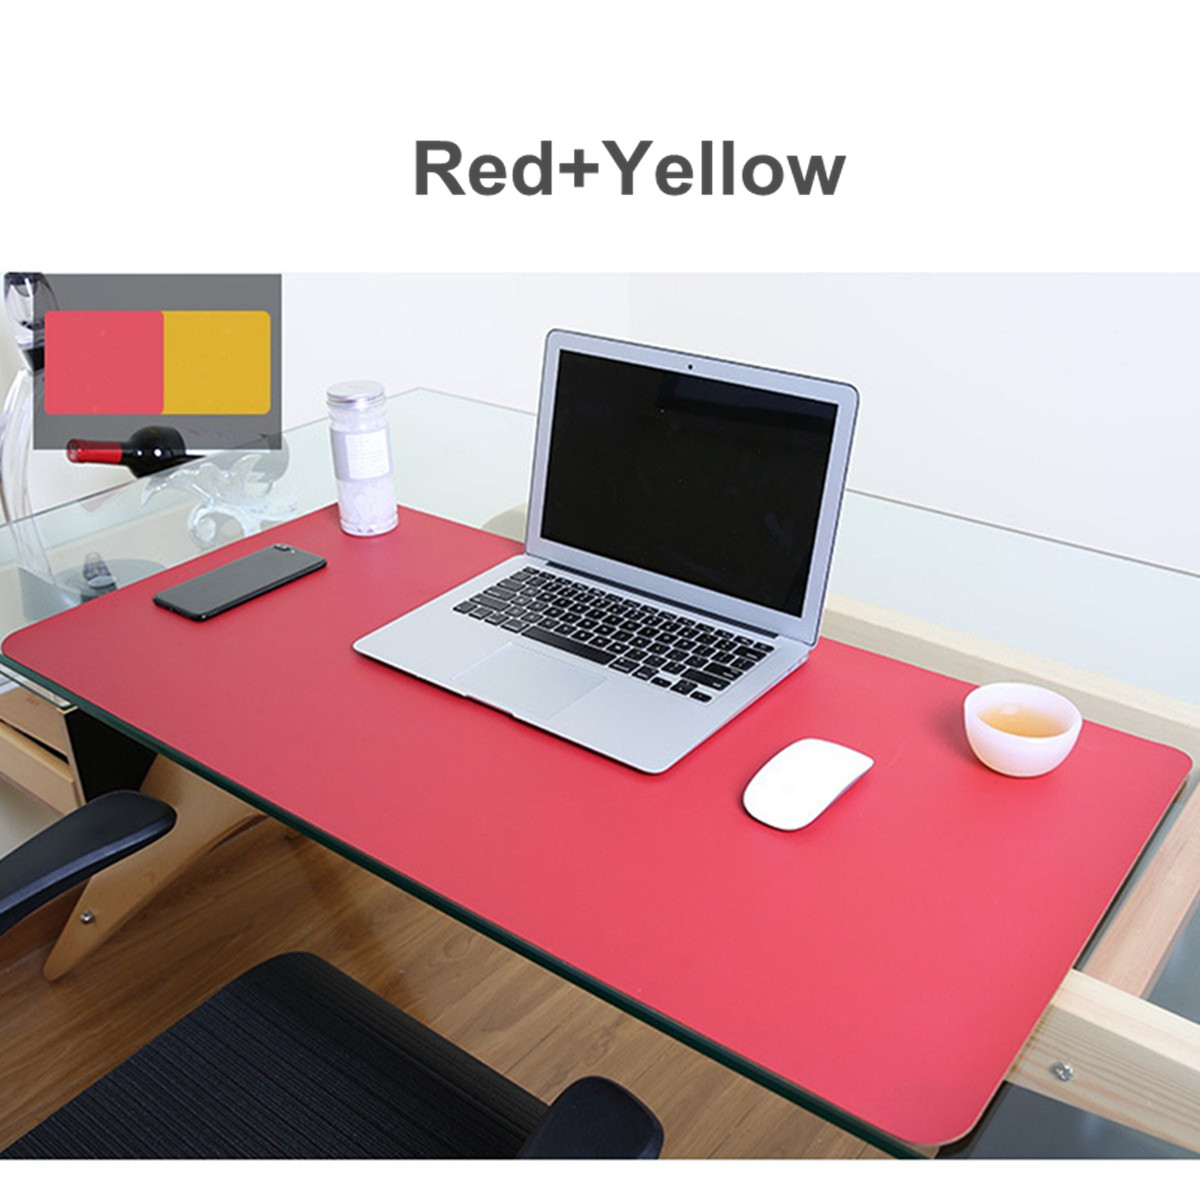 80x40cm Both Sides Two Colors Extended PU leather Mouse Pad Mat Large Office Gaming Desk Mat 11